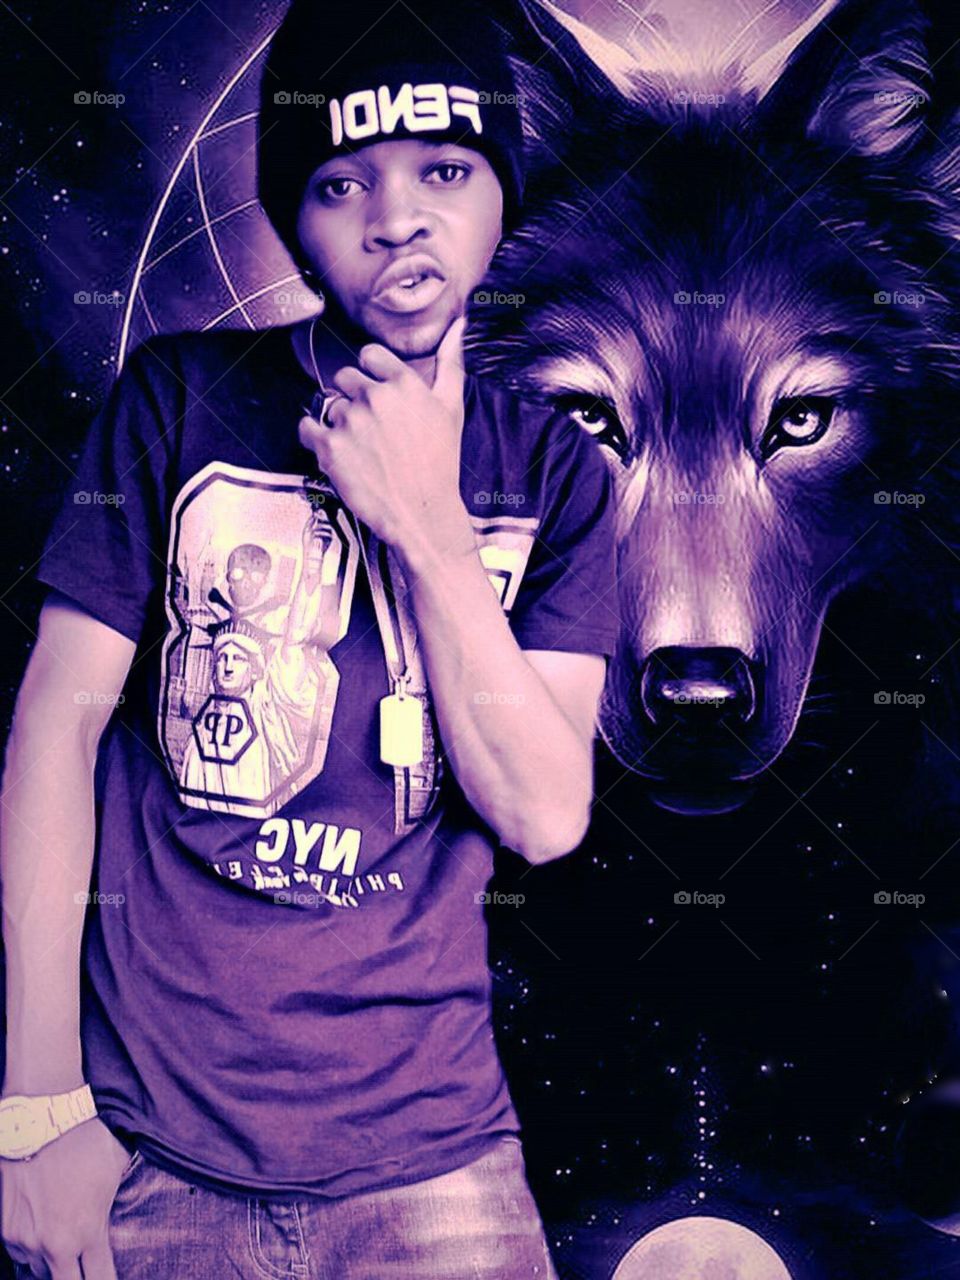 Am on my new 🆕 upgrade,the best from the shadow.
The devil is a liar cuz my dog is the fire.
The eyes of the Blacks mean danger in the heart.